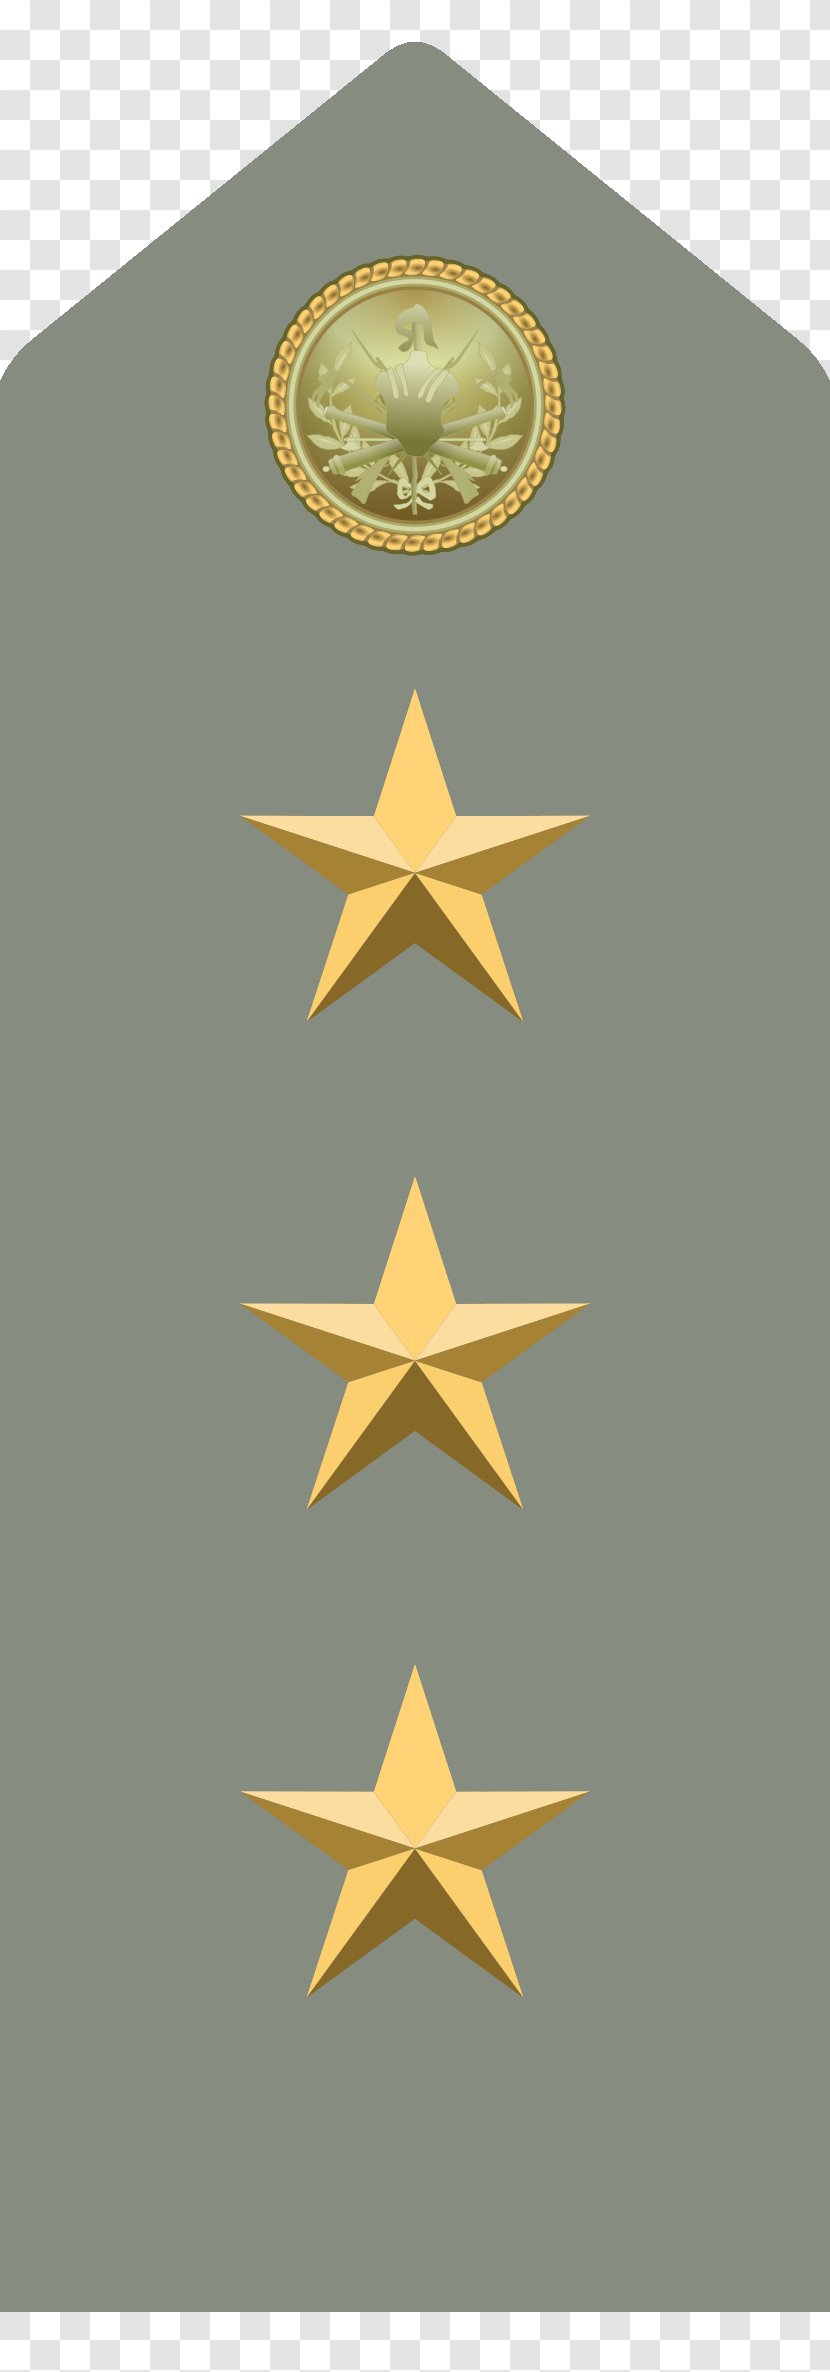 Italy Military Rank Colonel Major Army - Symmetry - Rank-and-file Transparent PNG